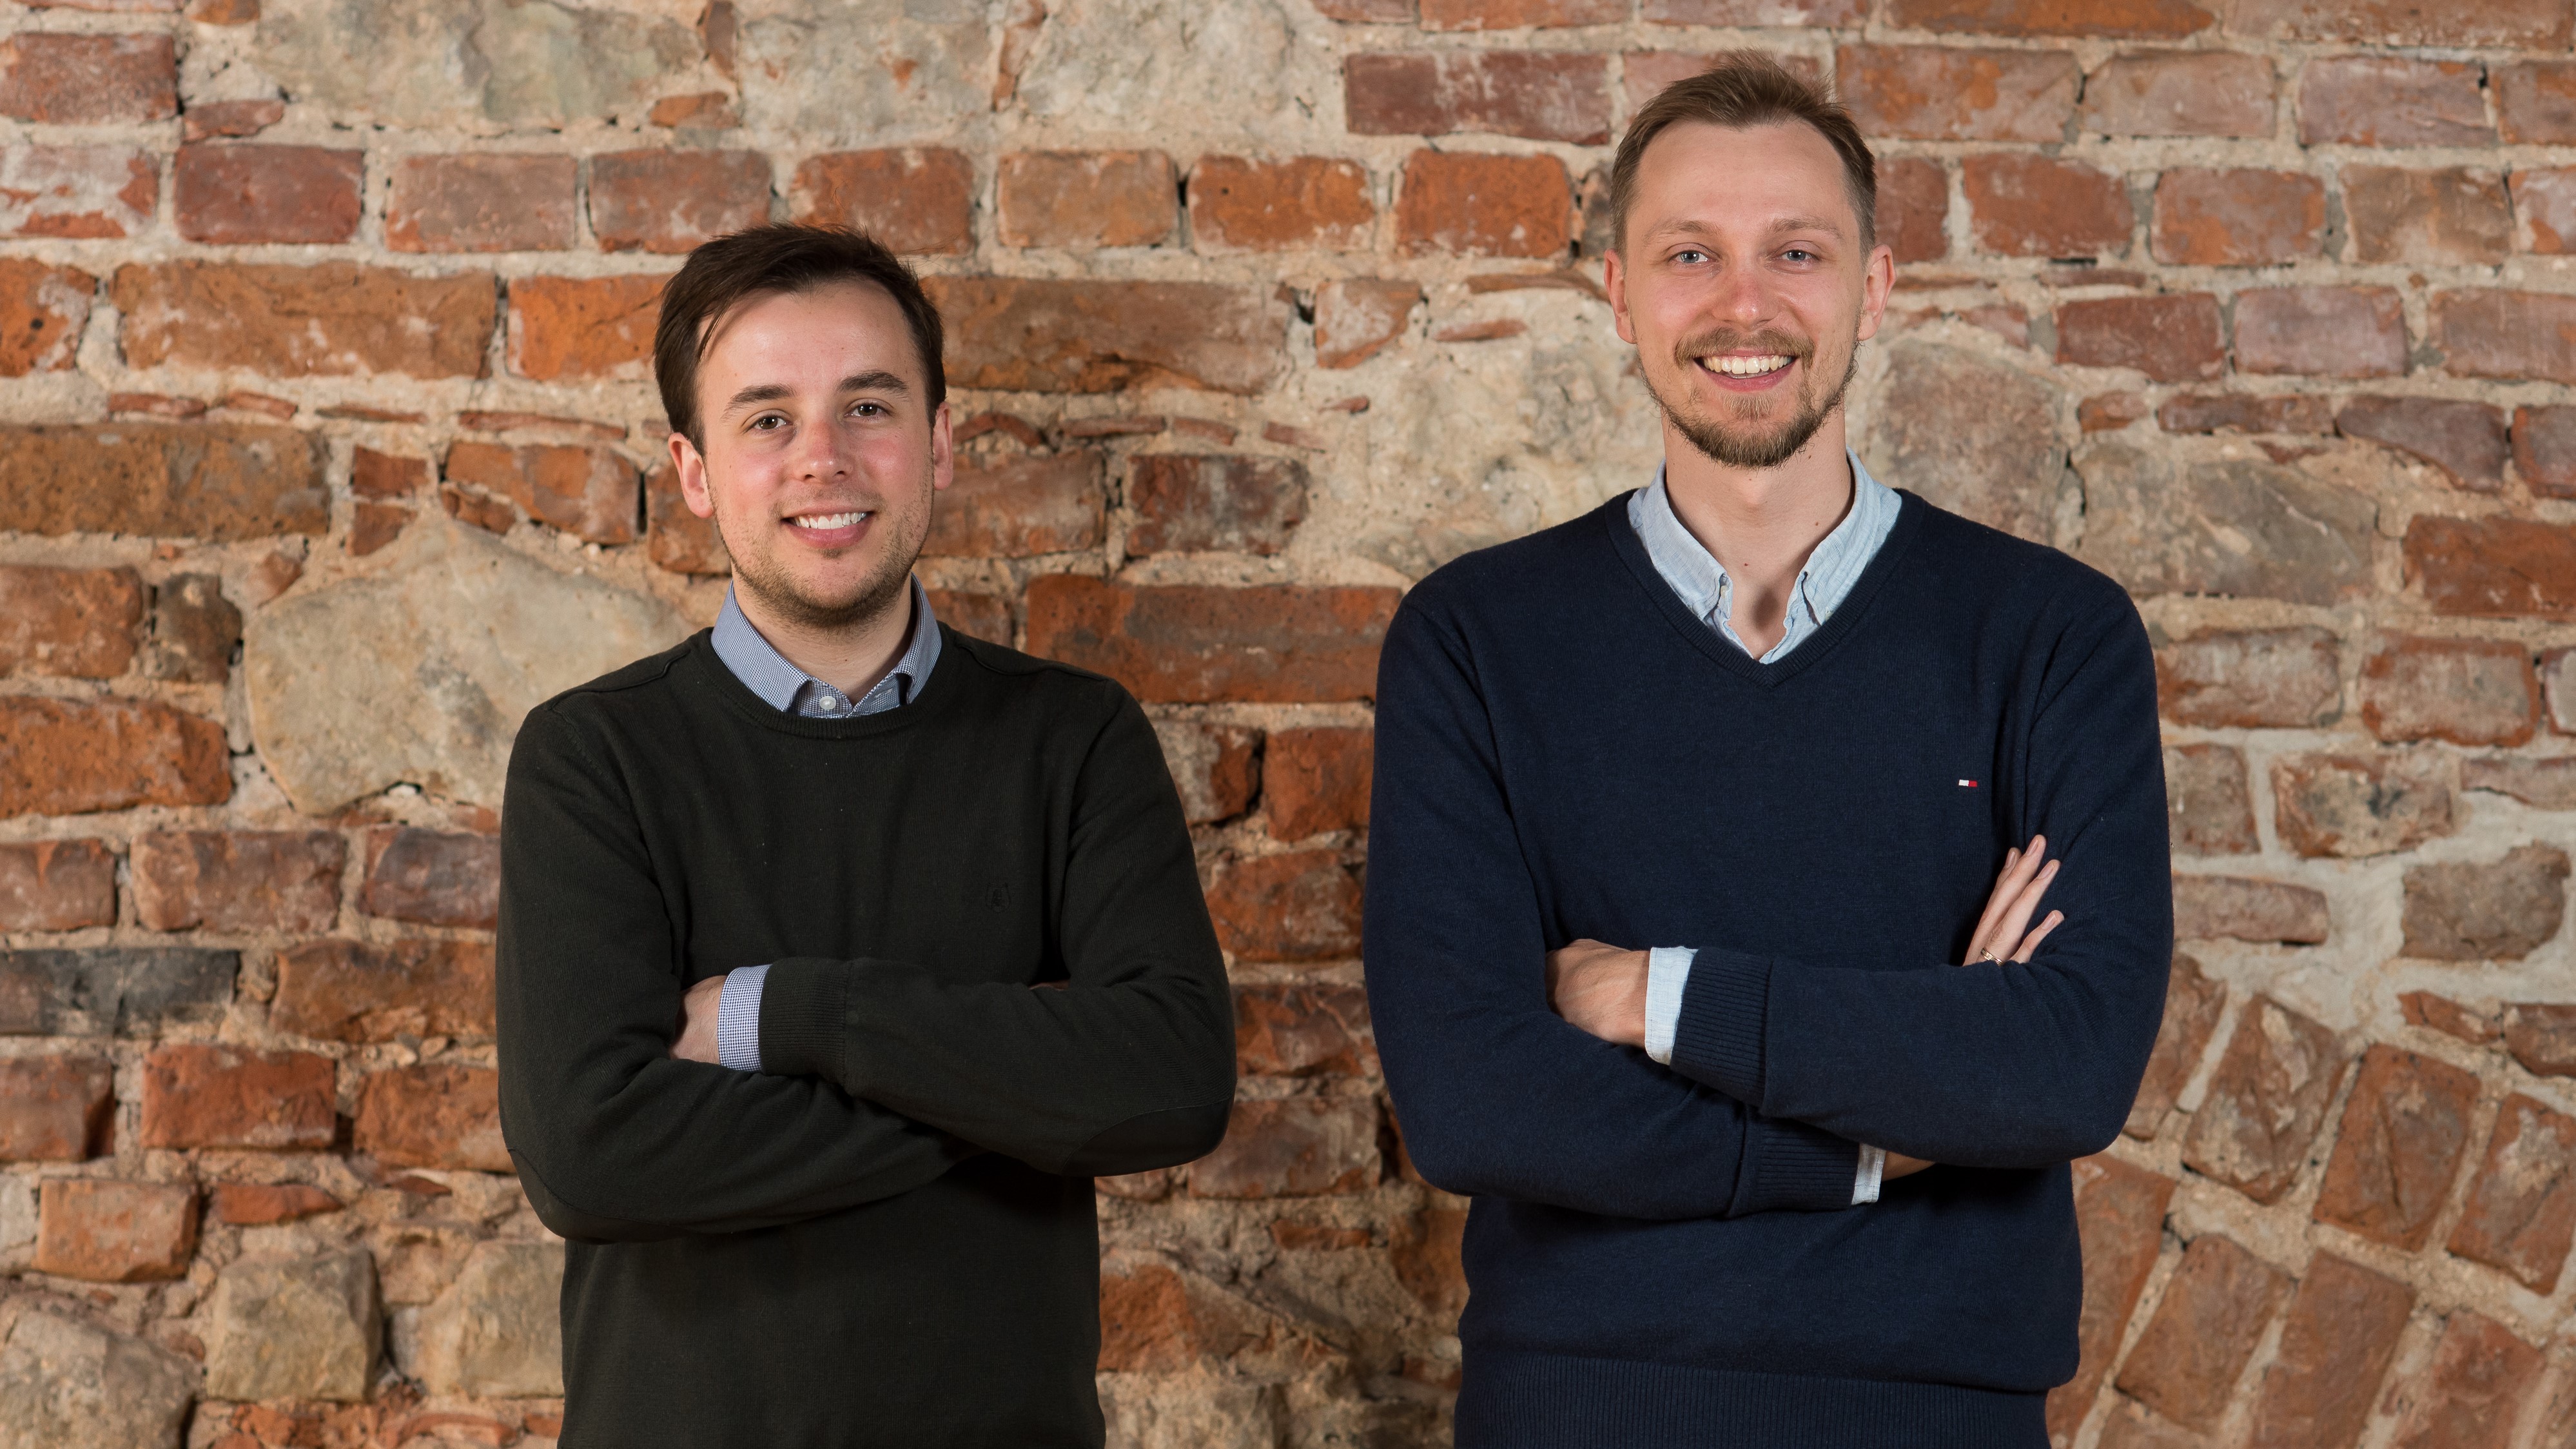 UK Contract Management Company Raises $5M from Major U.S. Investor